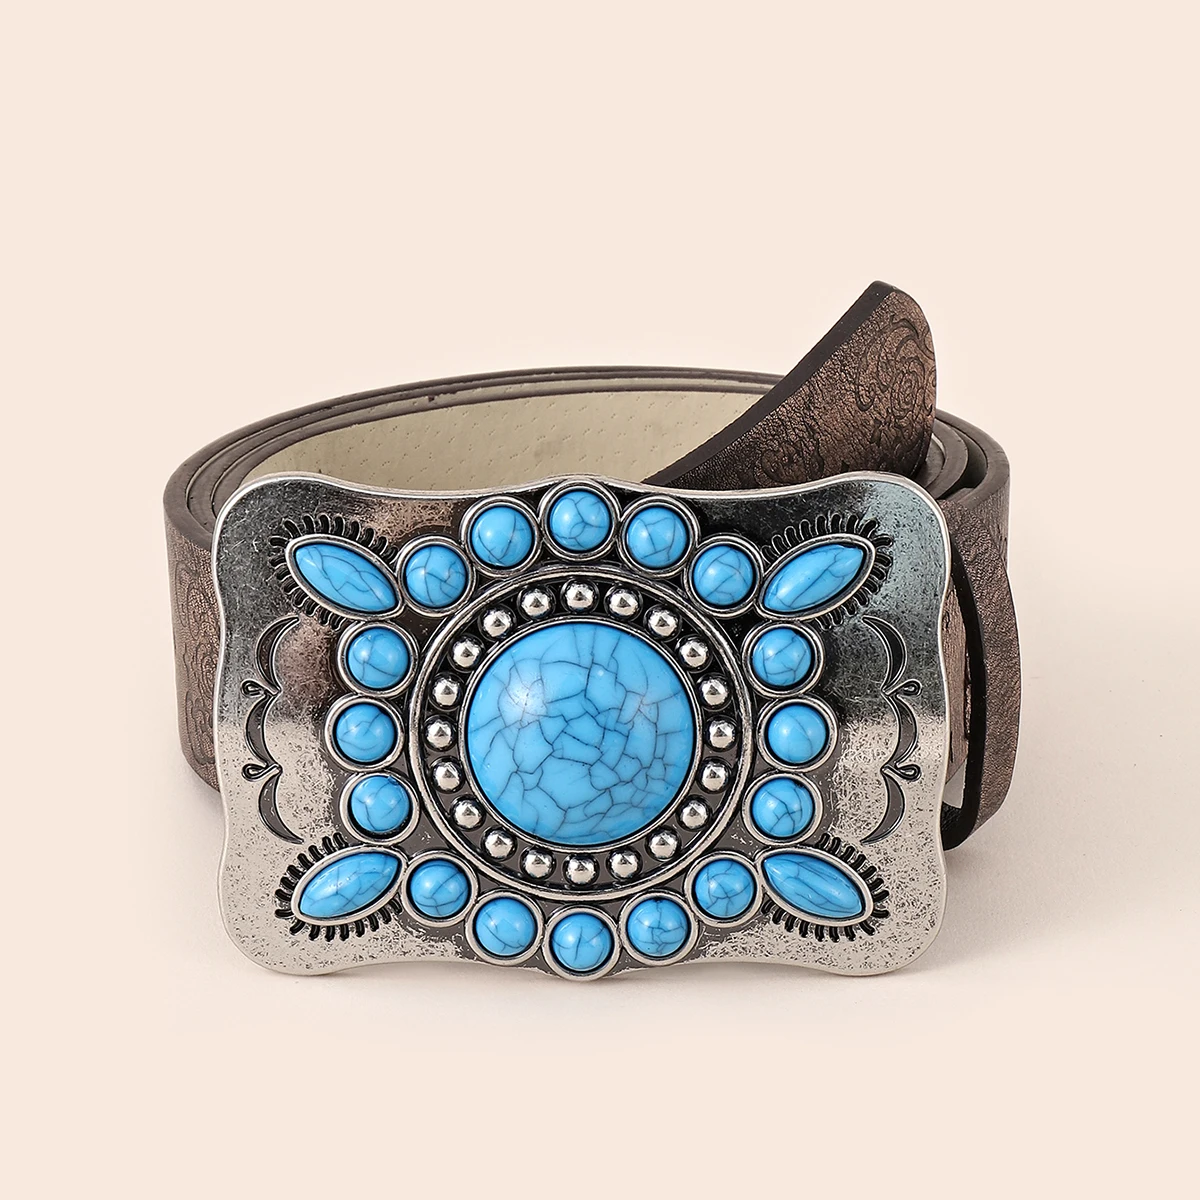 Fashion Geometric Buckle with Turquoises Belt for Women